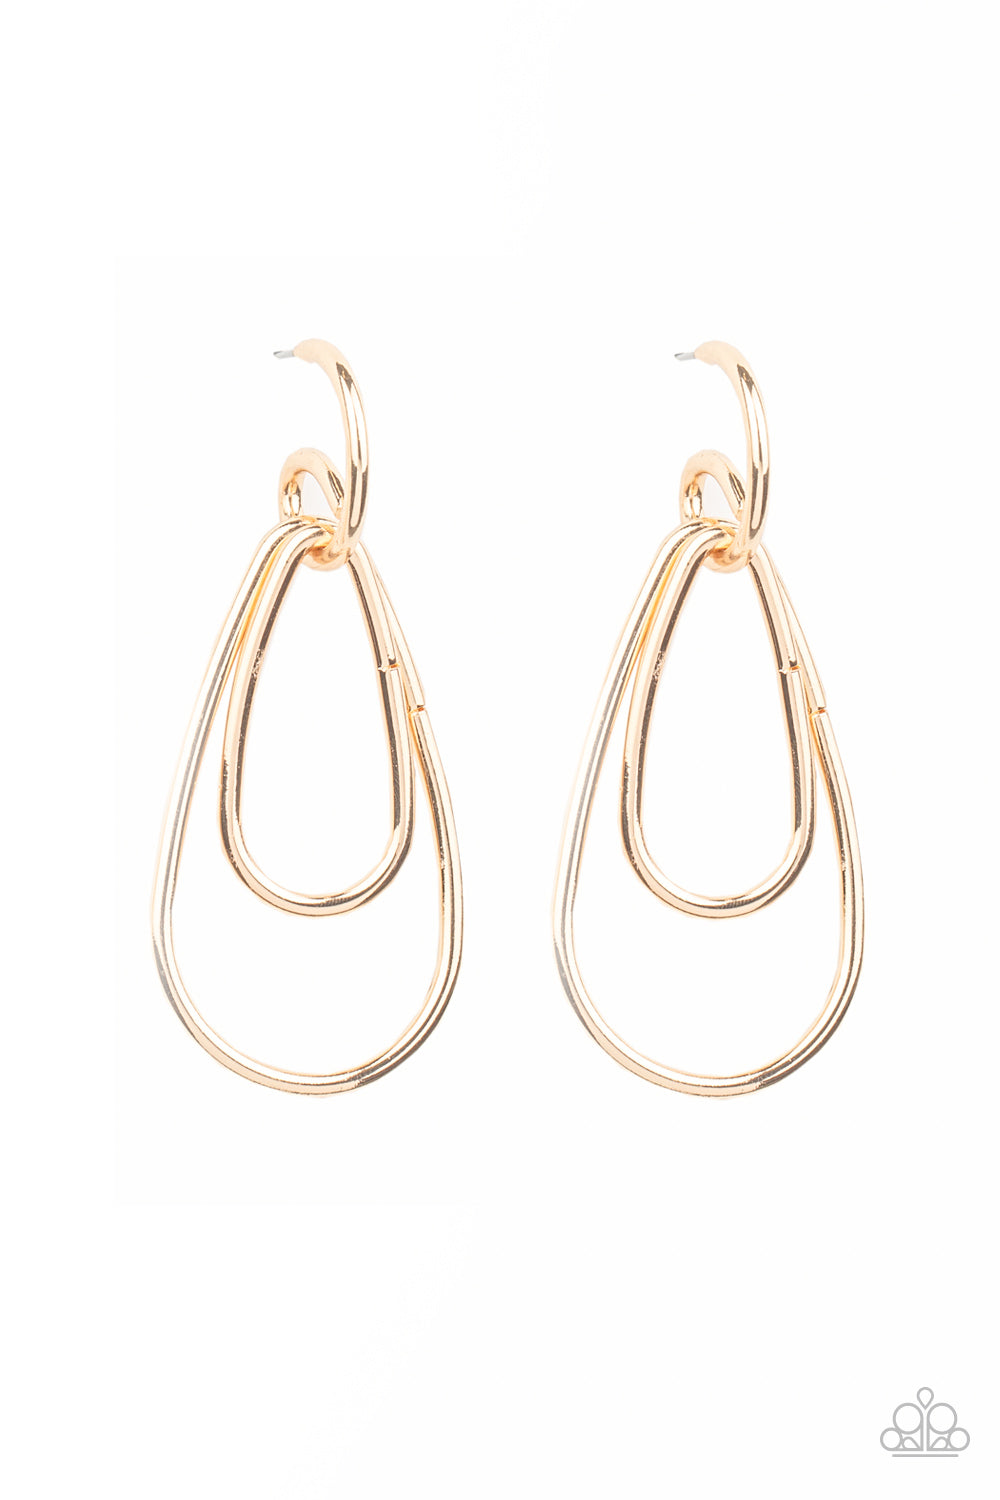 Droppin Drama Gold Hoop Earring - Paparazzi Accessories